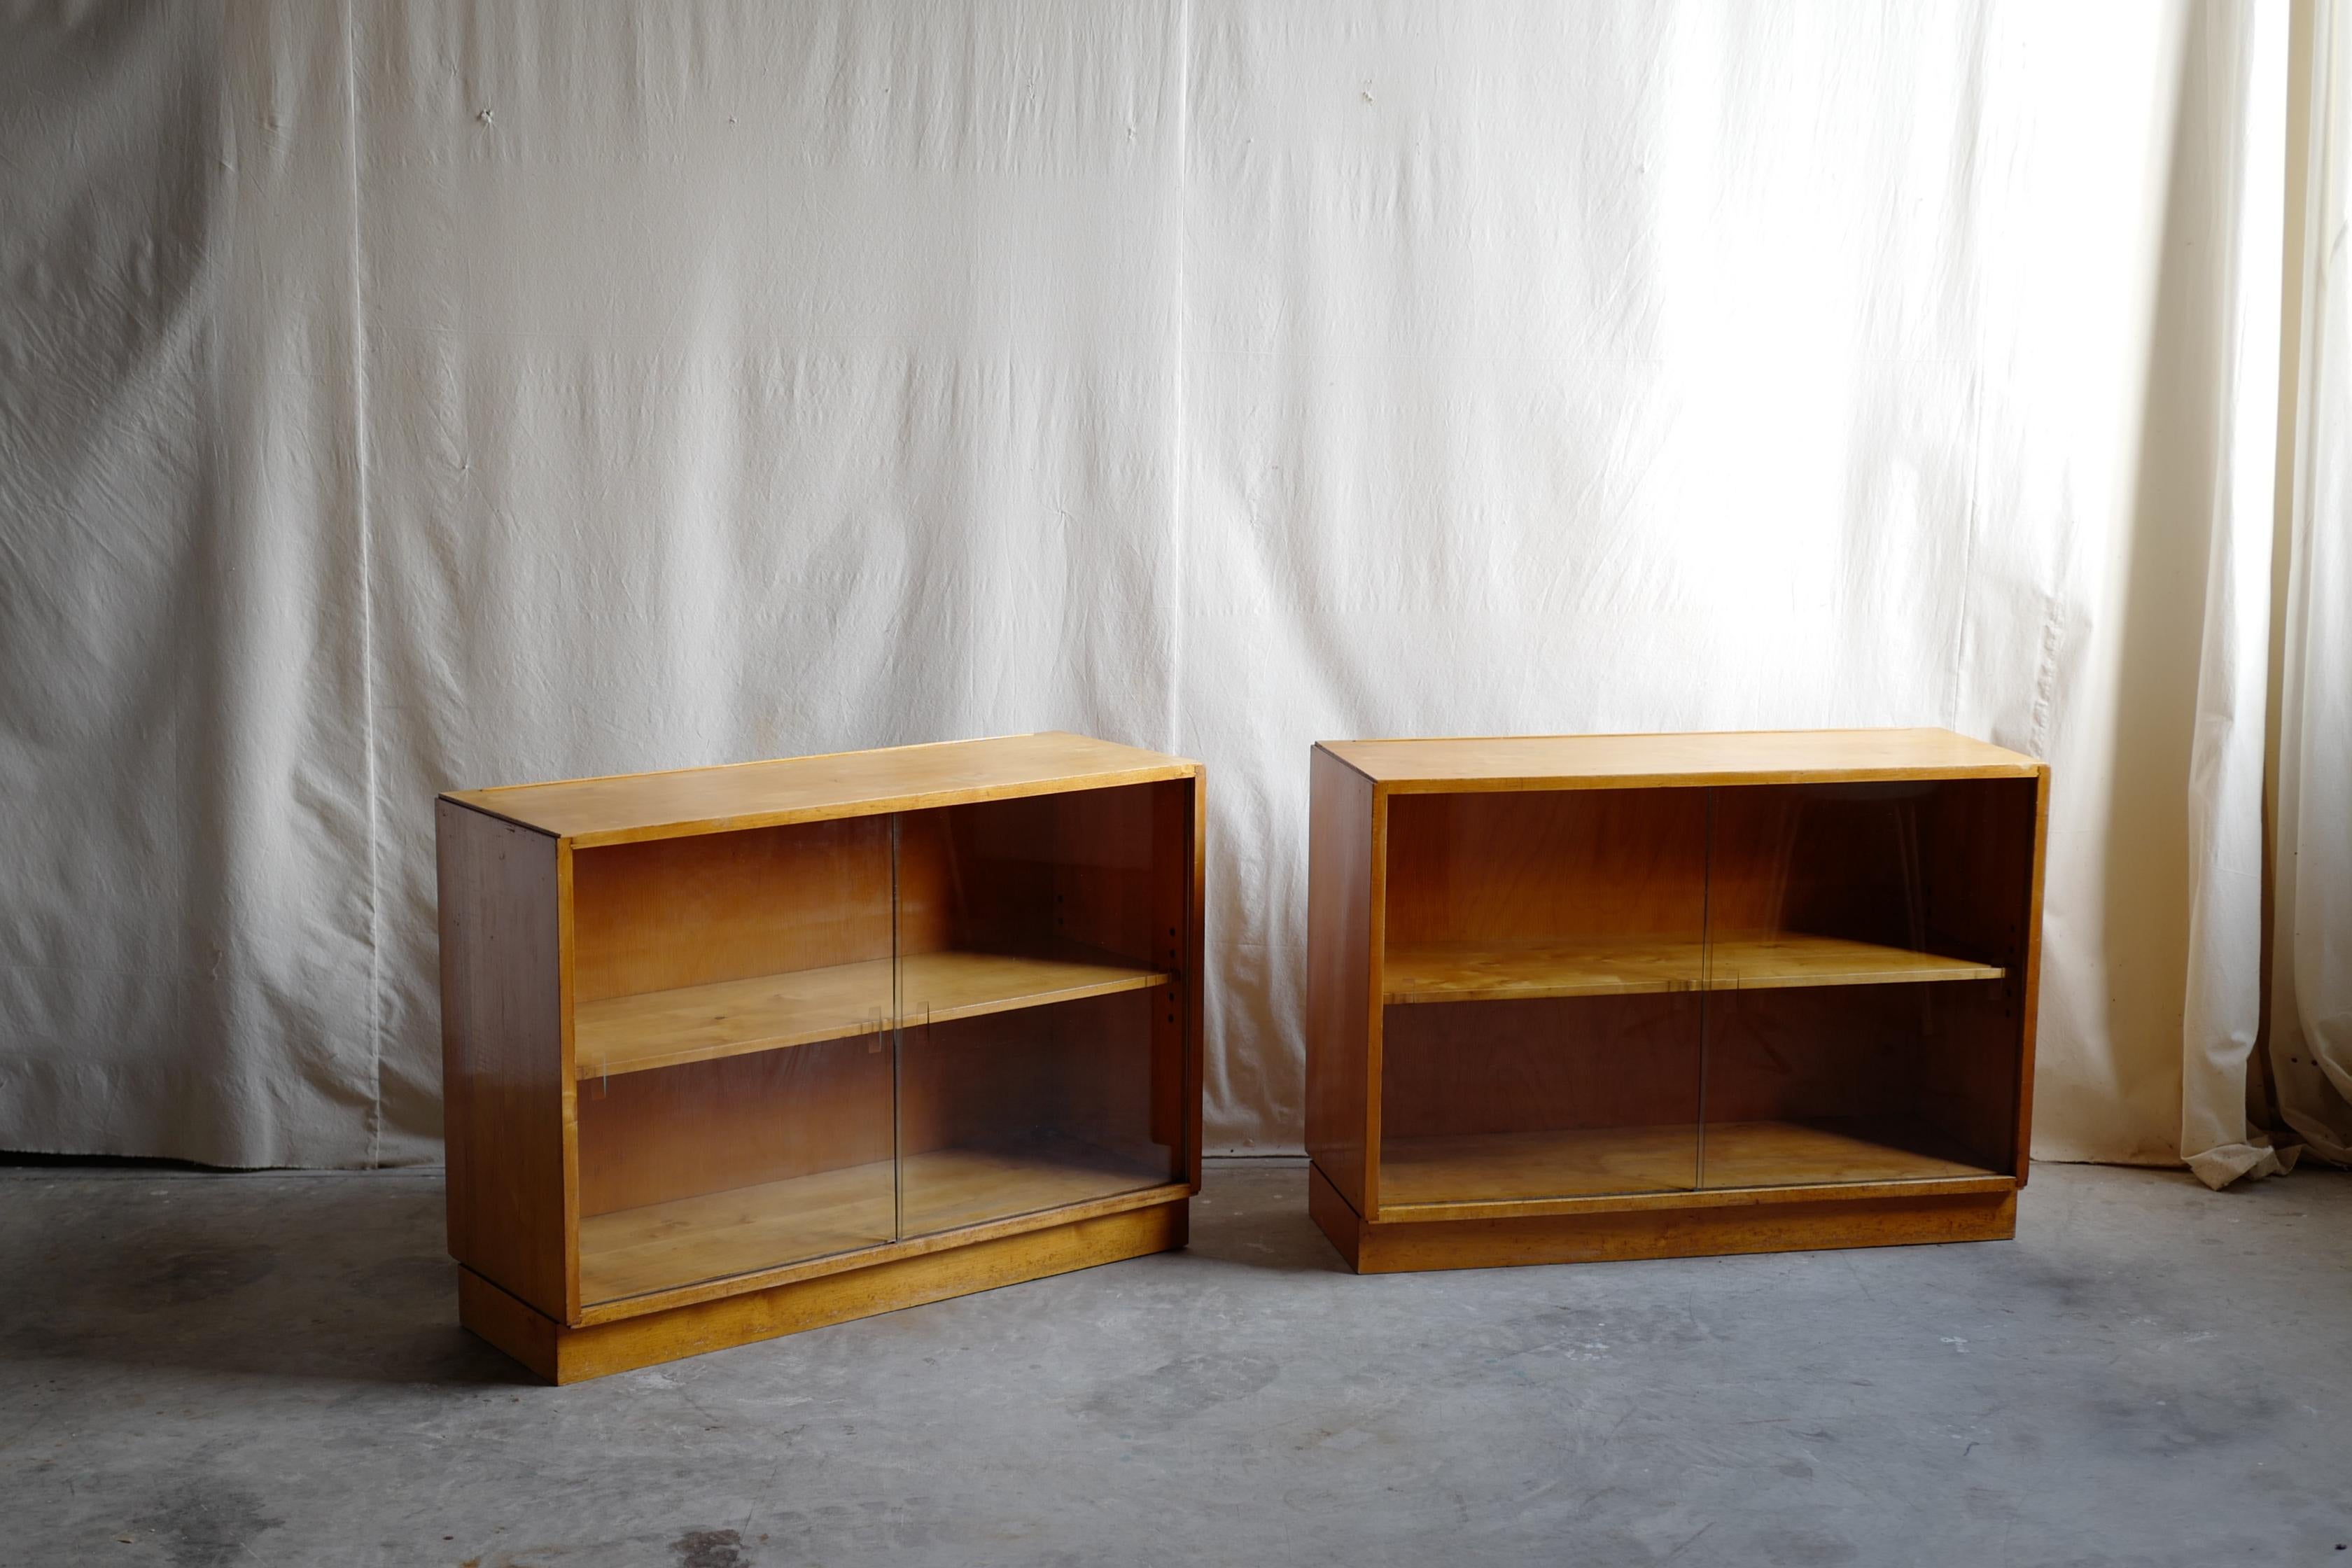 alvar & aino aalto design glass cabinet.
this is most earliest products of aalto furniture.
alvar & aino try to sell their furniture in UK as finmar.
So this is original condition. 
modernism make our world and it is normaly in our recently life,but